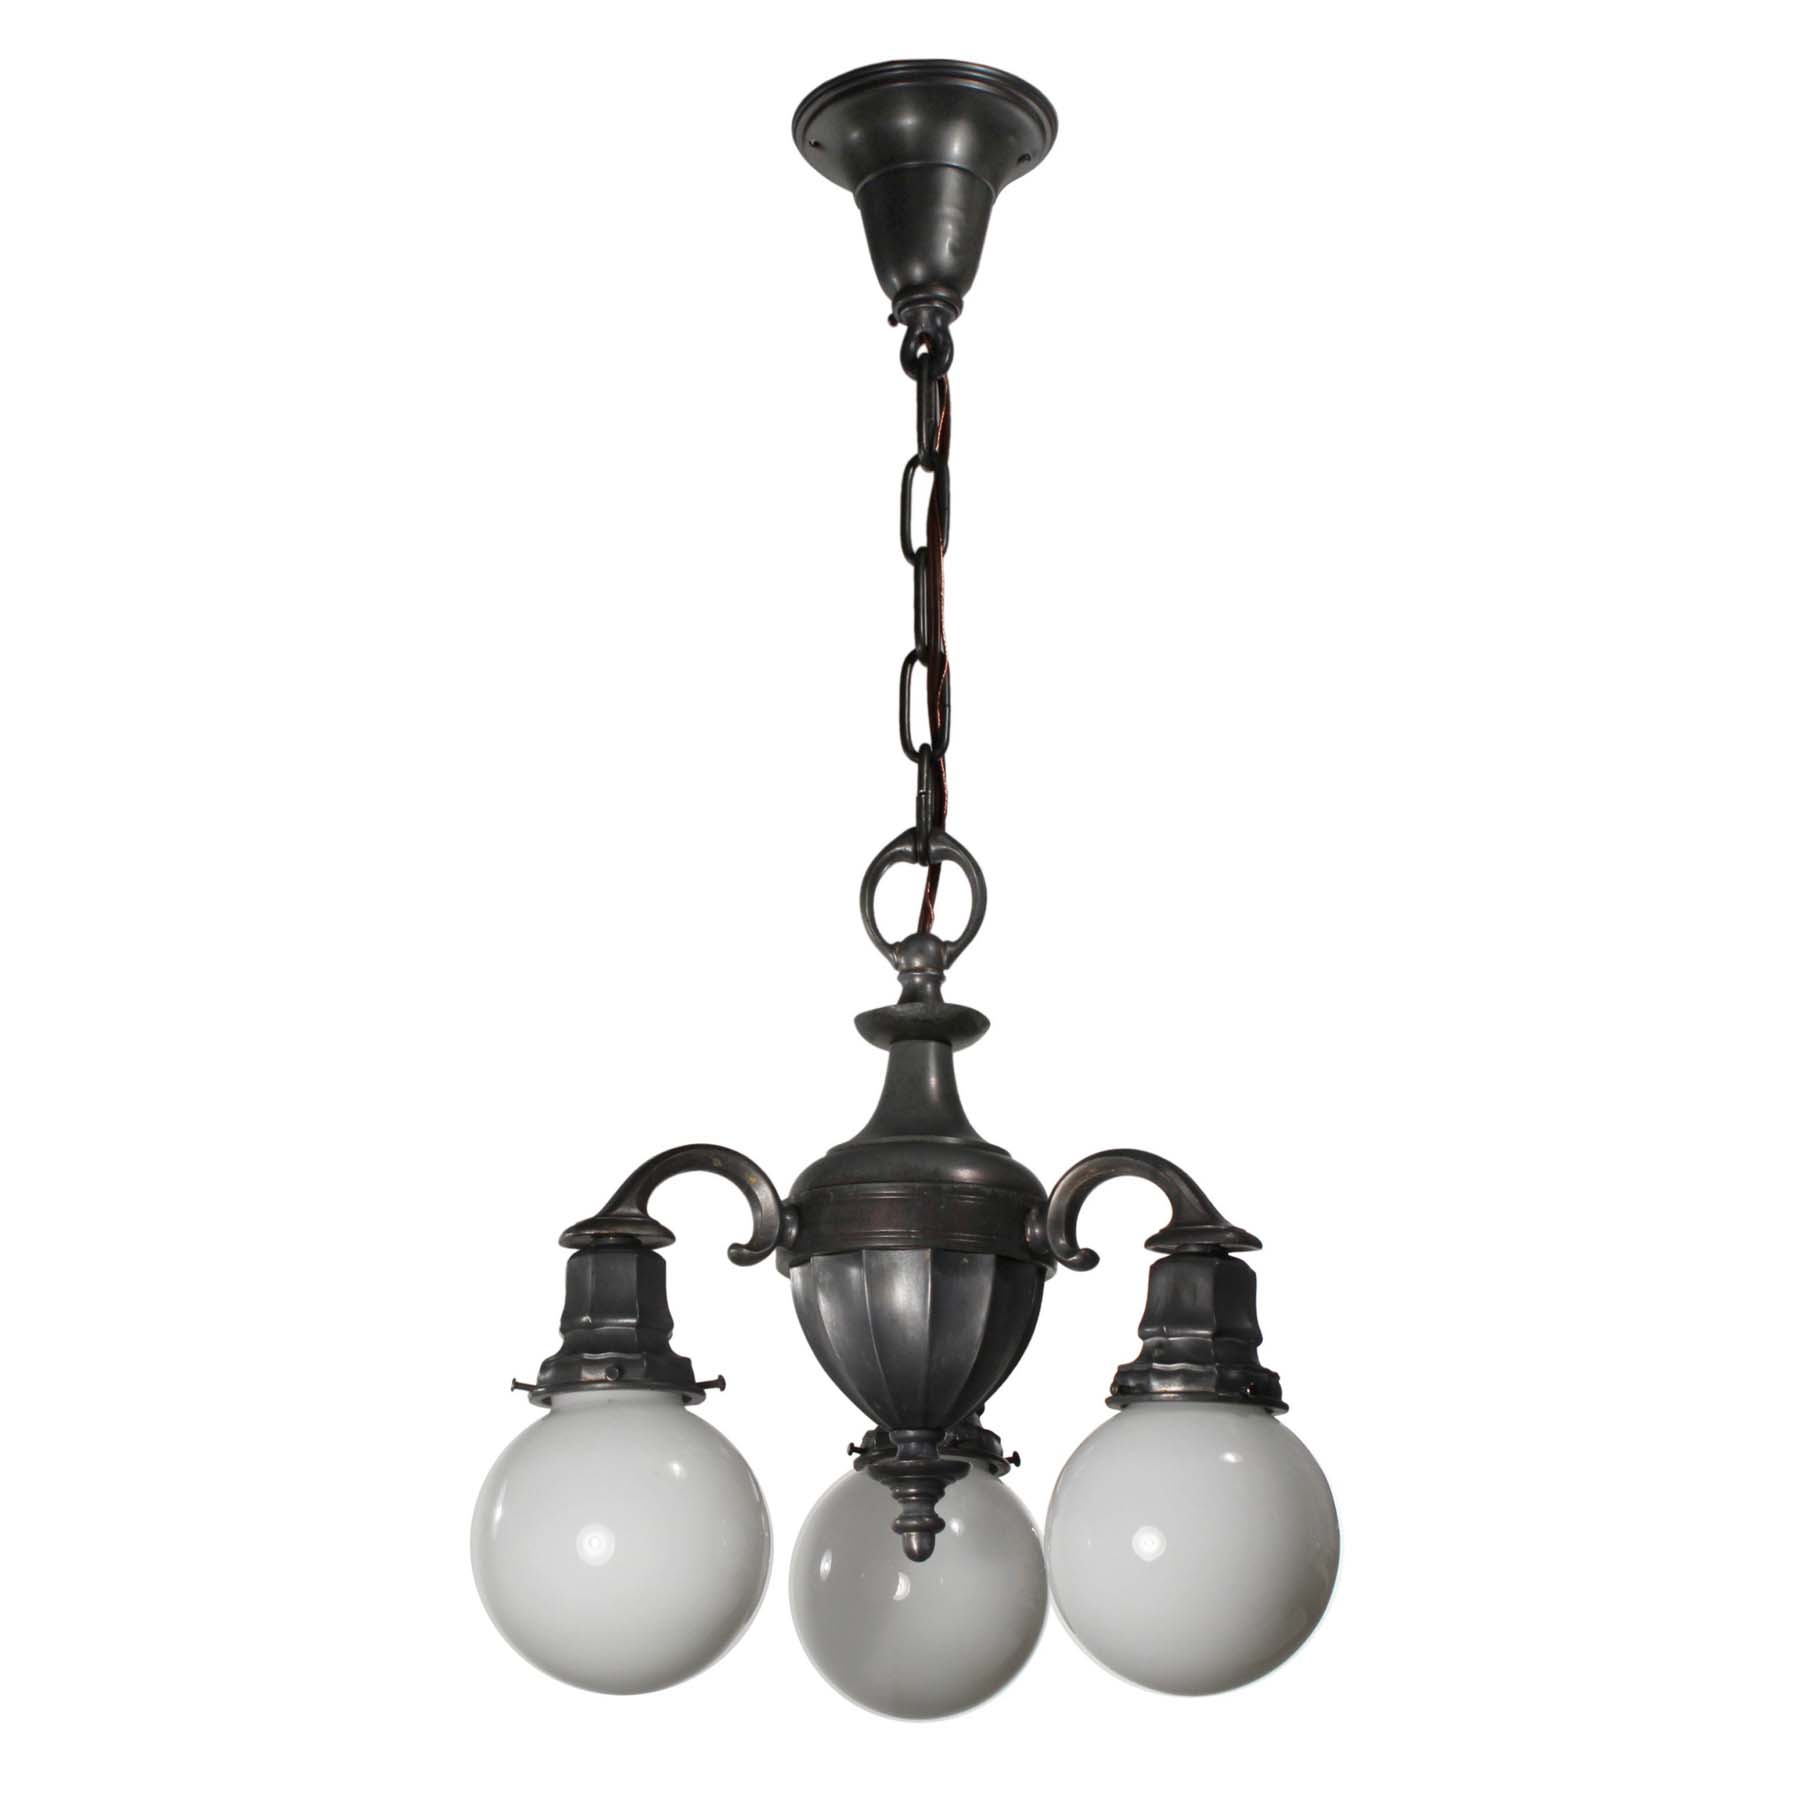 SOLD Chandelier with Glass Globes, Antique Lighting-67937